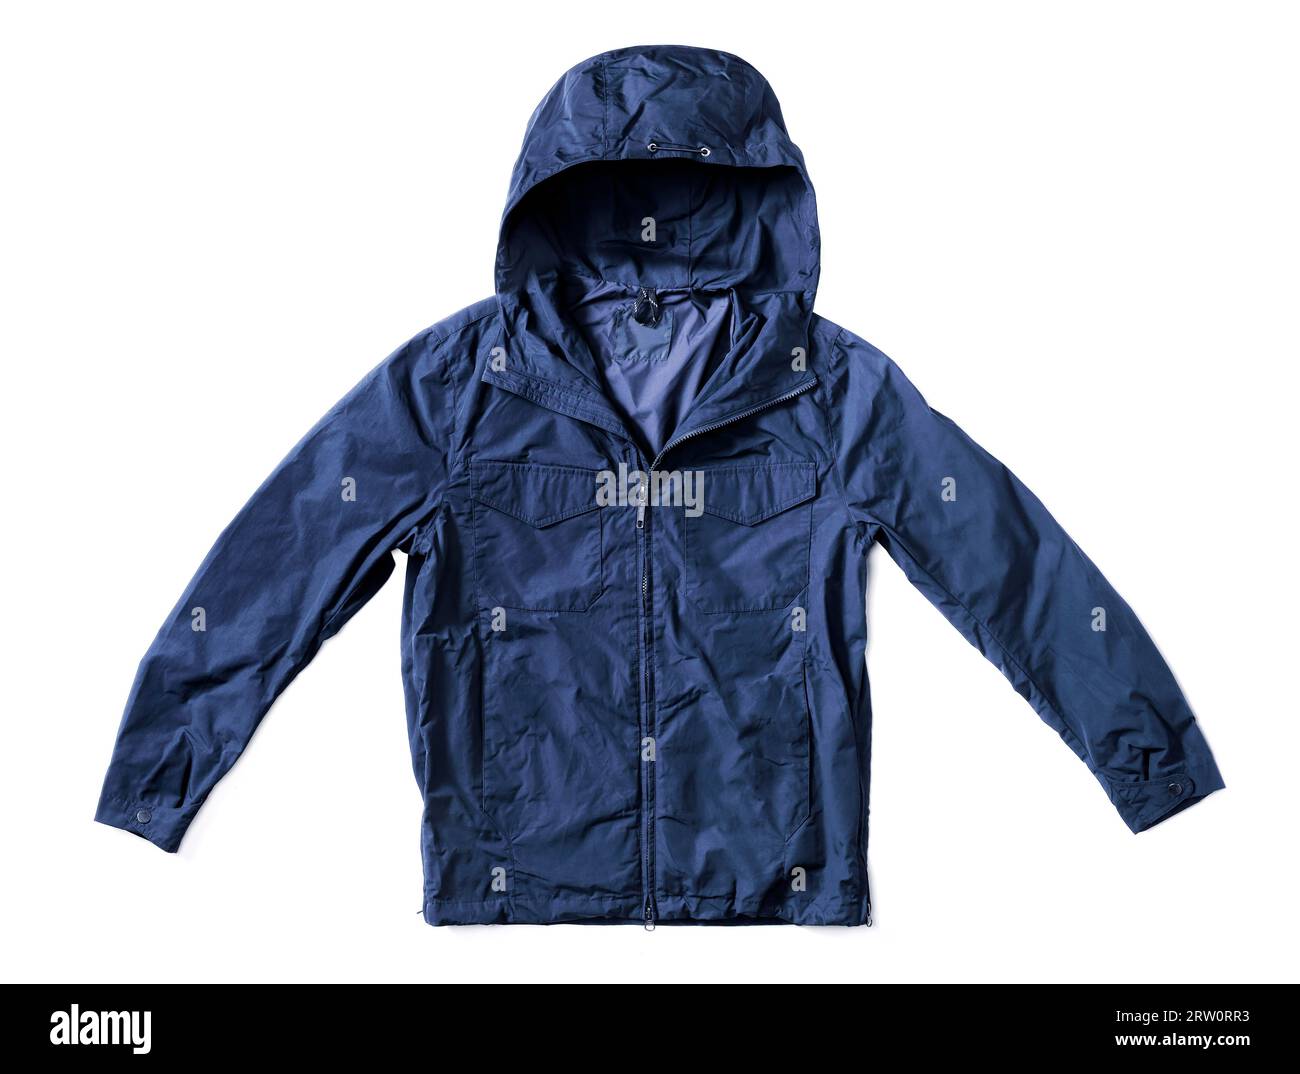 Men's dark blue hooded windproof jacket isolated on white with natural shadows Stock Photo